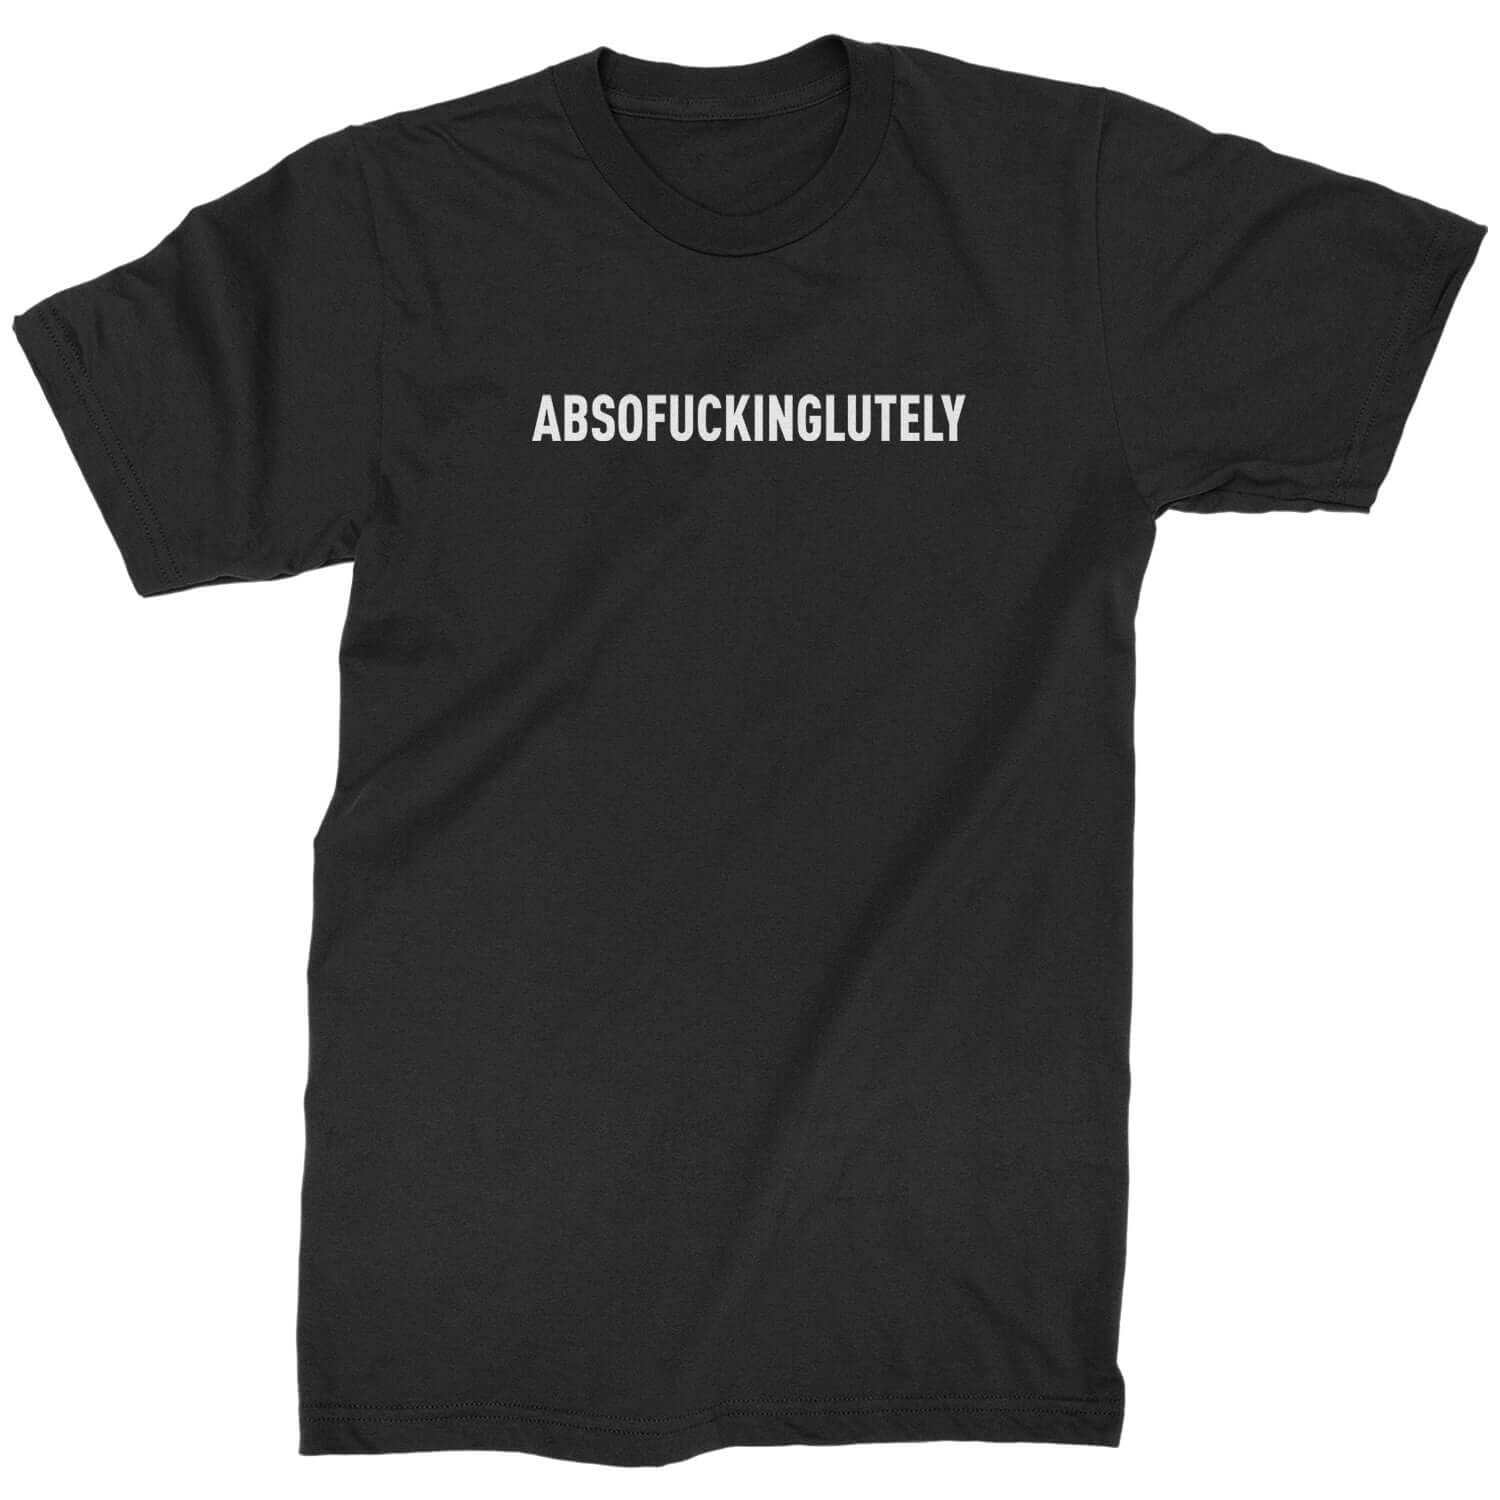 Abso f-cking lutely Mens T-shirt funny, shirt by Expression Tees